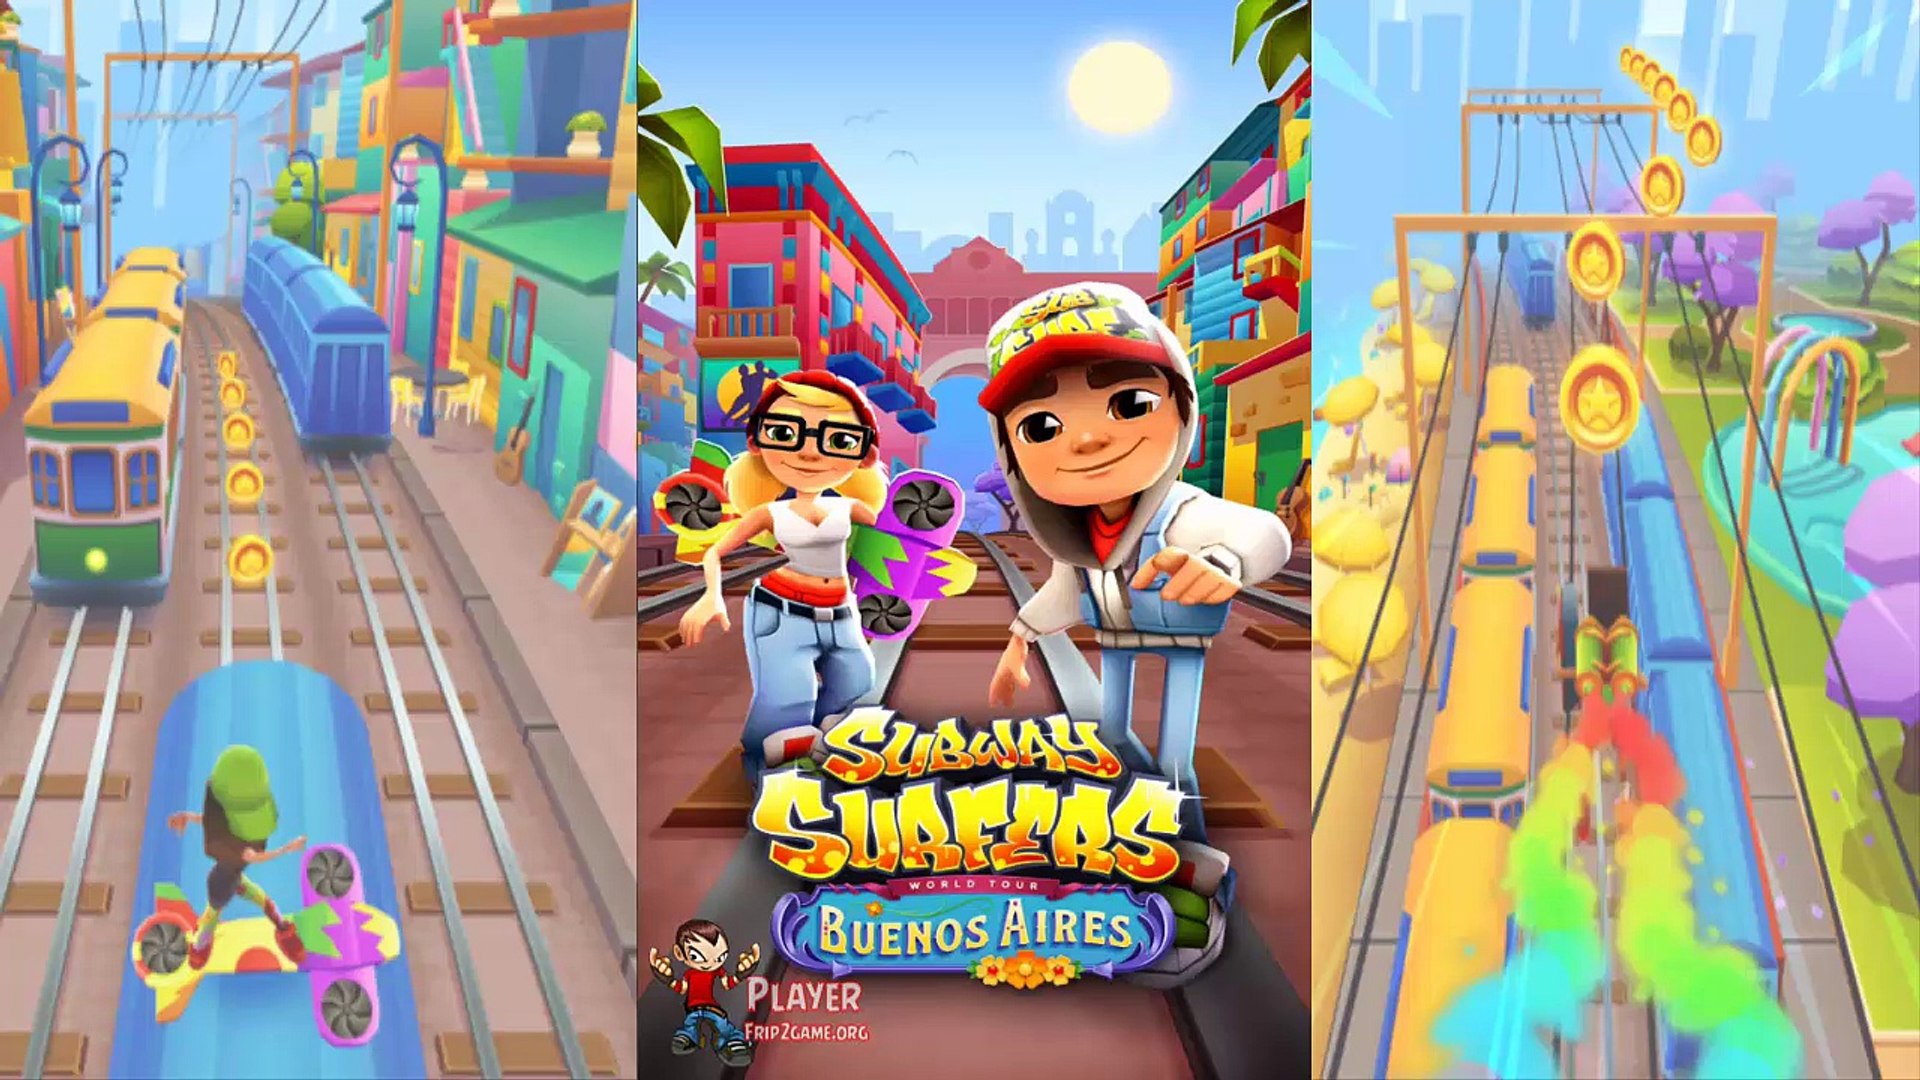 Subway Surfers World Tour: Buenos Aires 2018 Gameplay - video